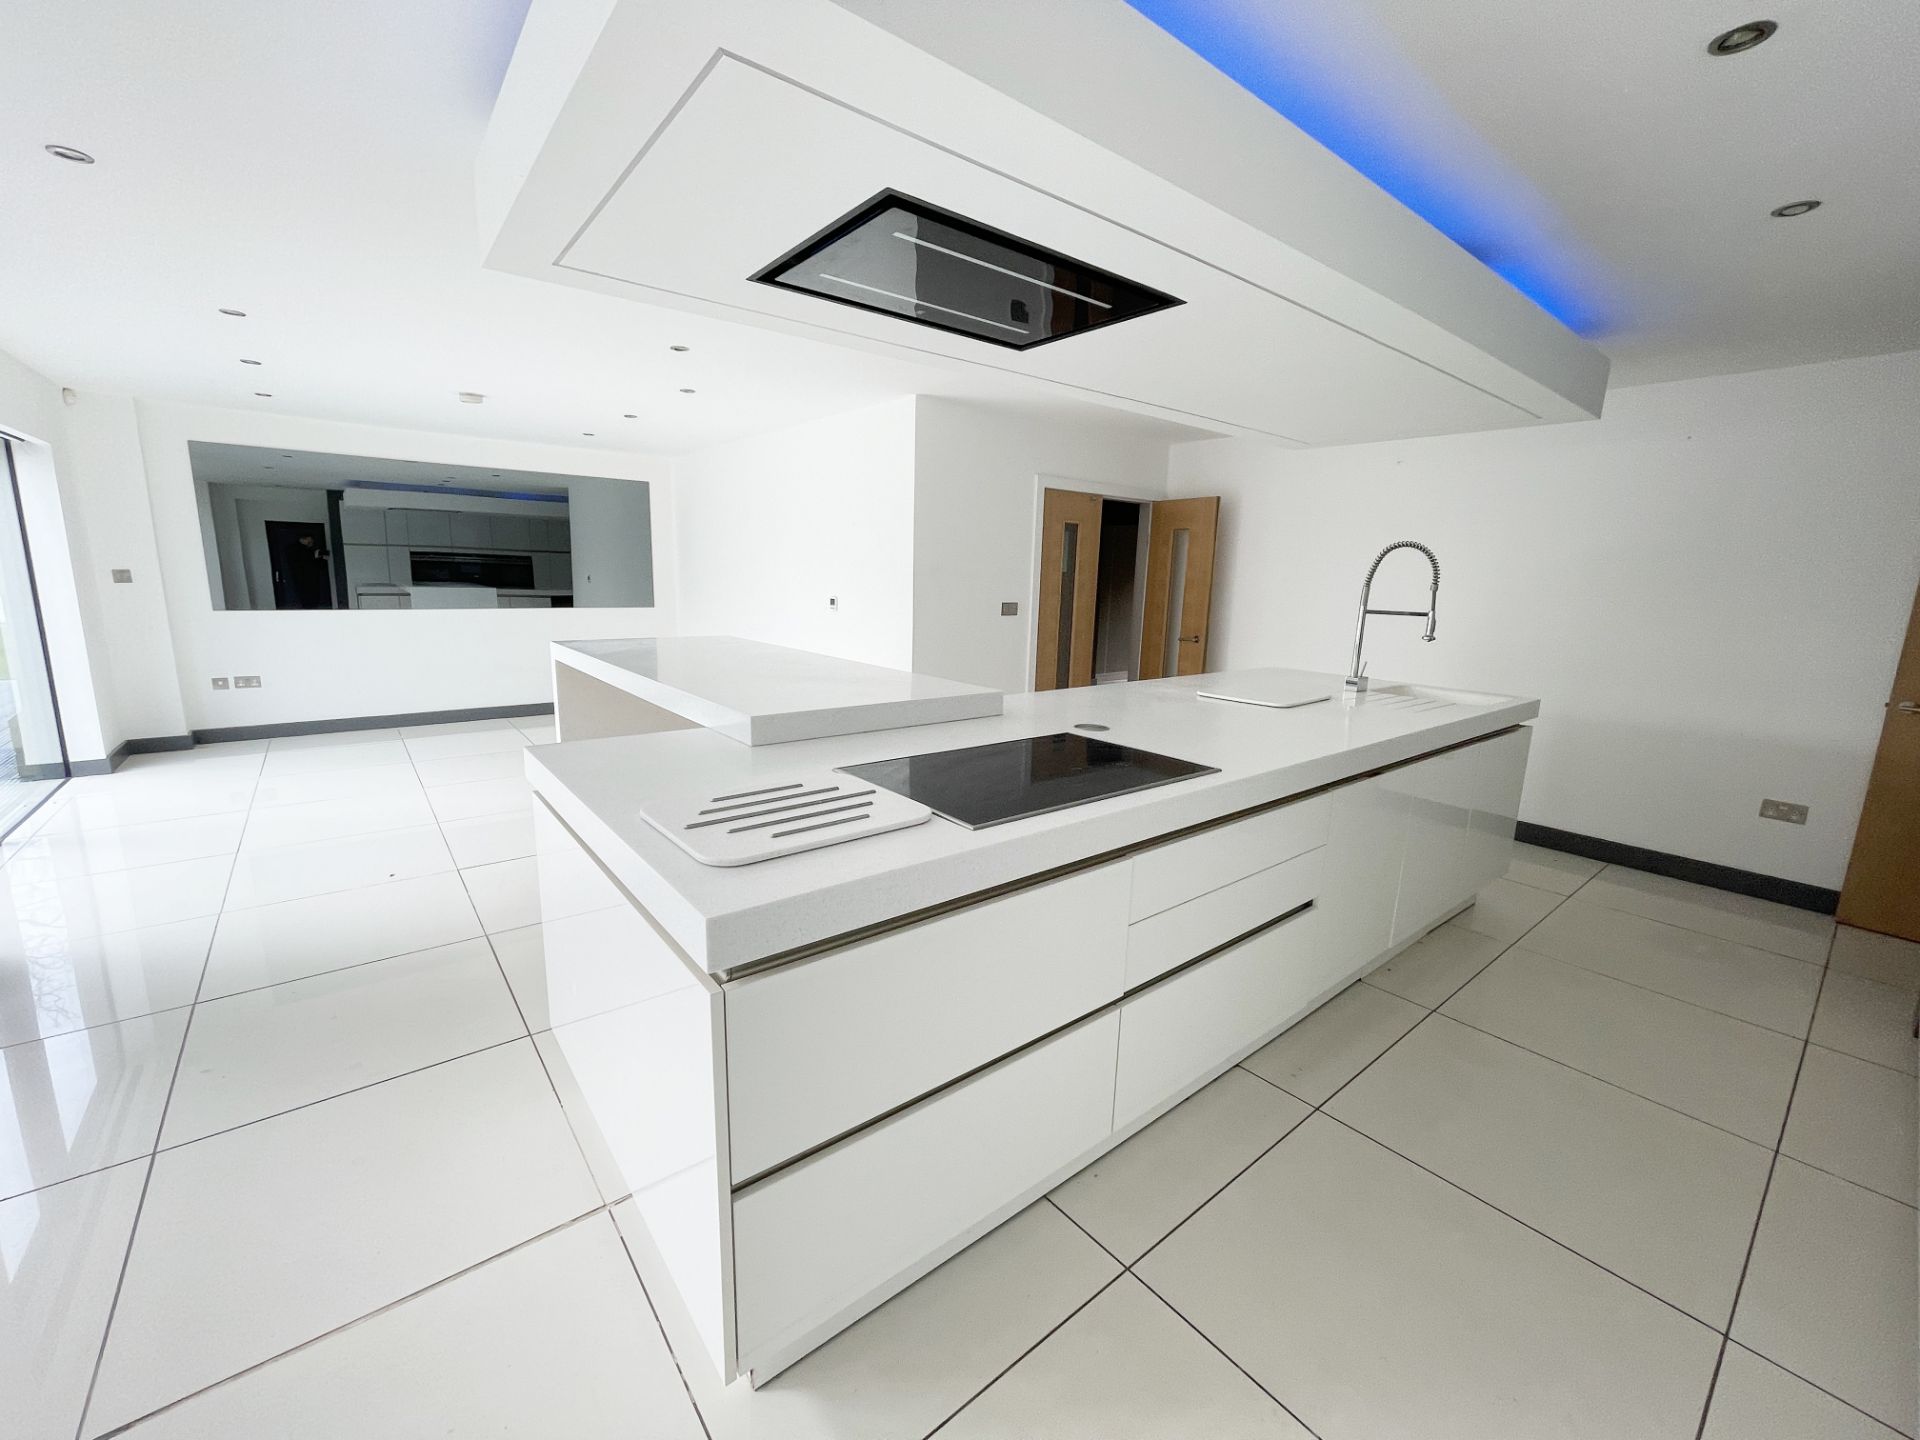 1 x SieMatic Contemporary Fitted Kitchen With Branded Appliances, Central Island + Corian Worktops - Image 18 of 100